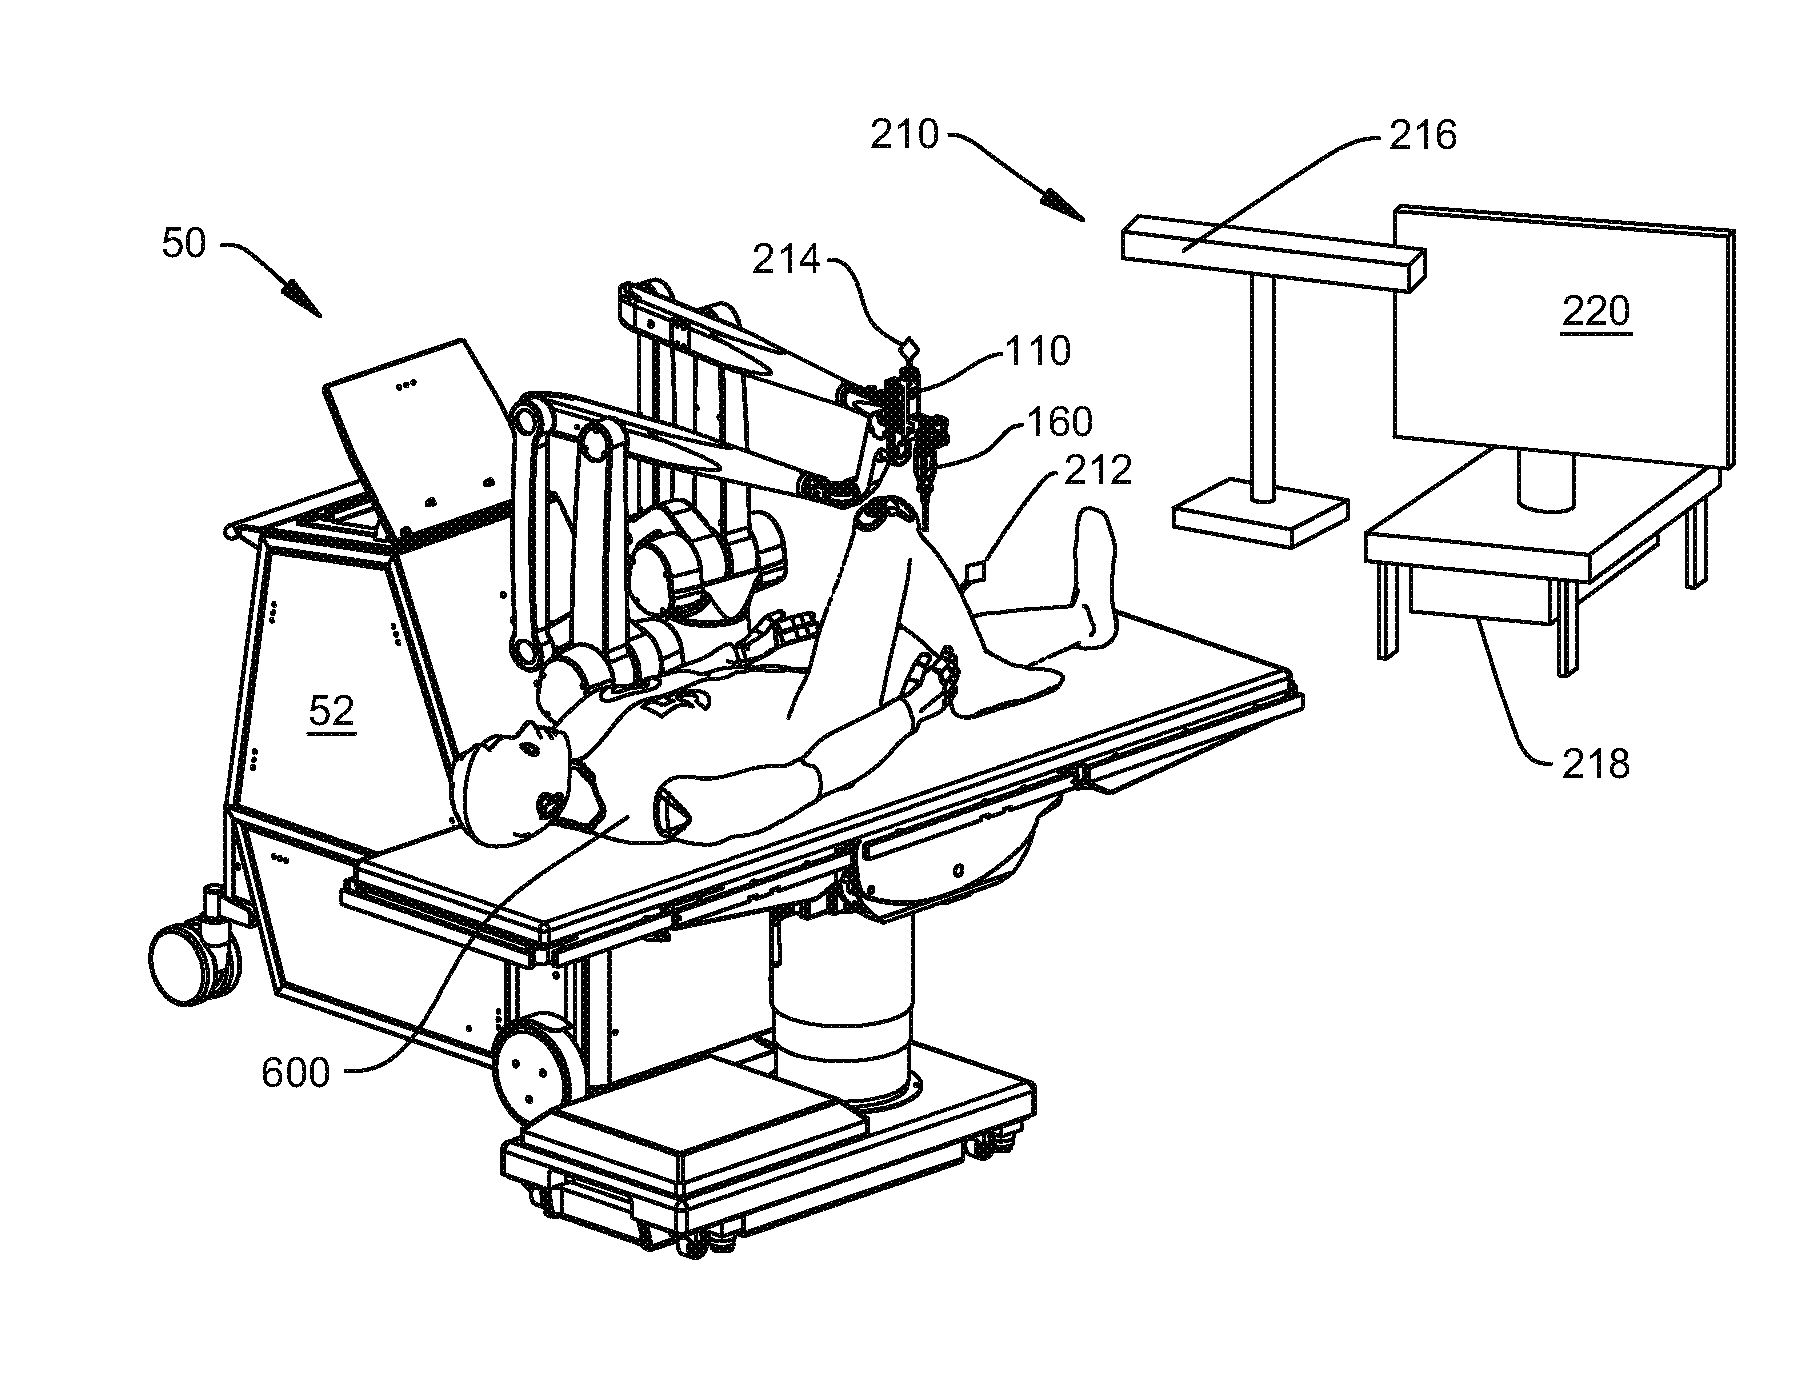 Navigation System for use with a Surgical Manipulator Operable in Manual or Semi-Autonomous Modes